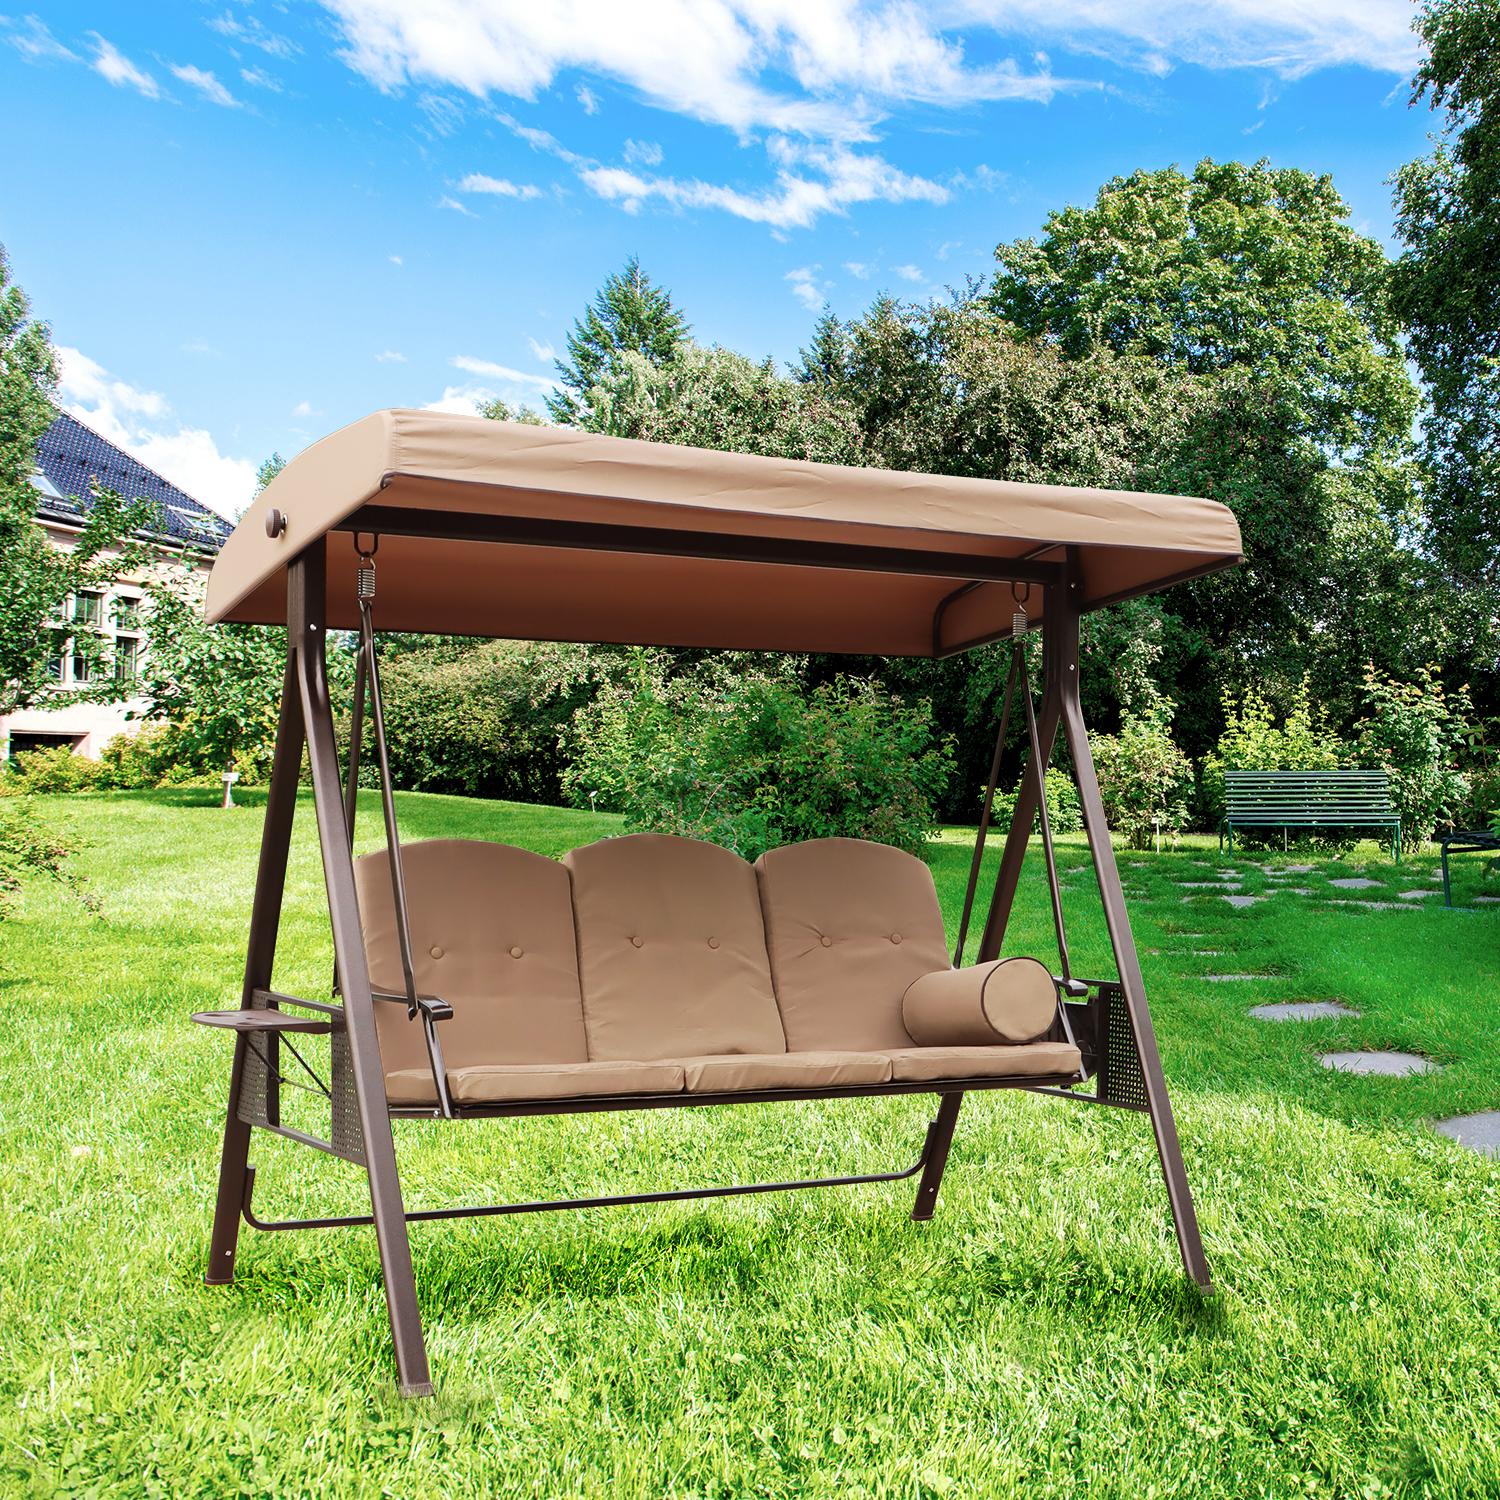 Leisure 3-Seat Patio Swing Glider Outdoor Canopy with Removable Cushions and Pillows for Backyard, Adjustable Shade Chair Hammock Lounge Chair Porch Garden with Side Tray and Steel Frame - Beige - image 4 of 8